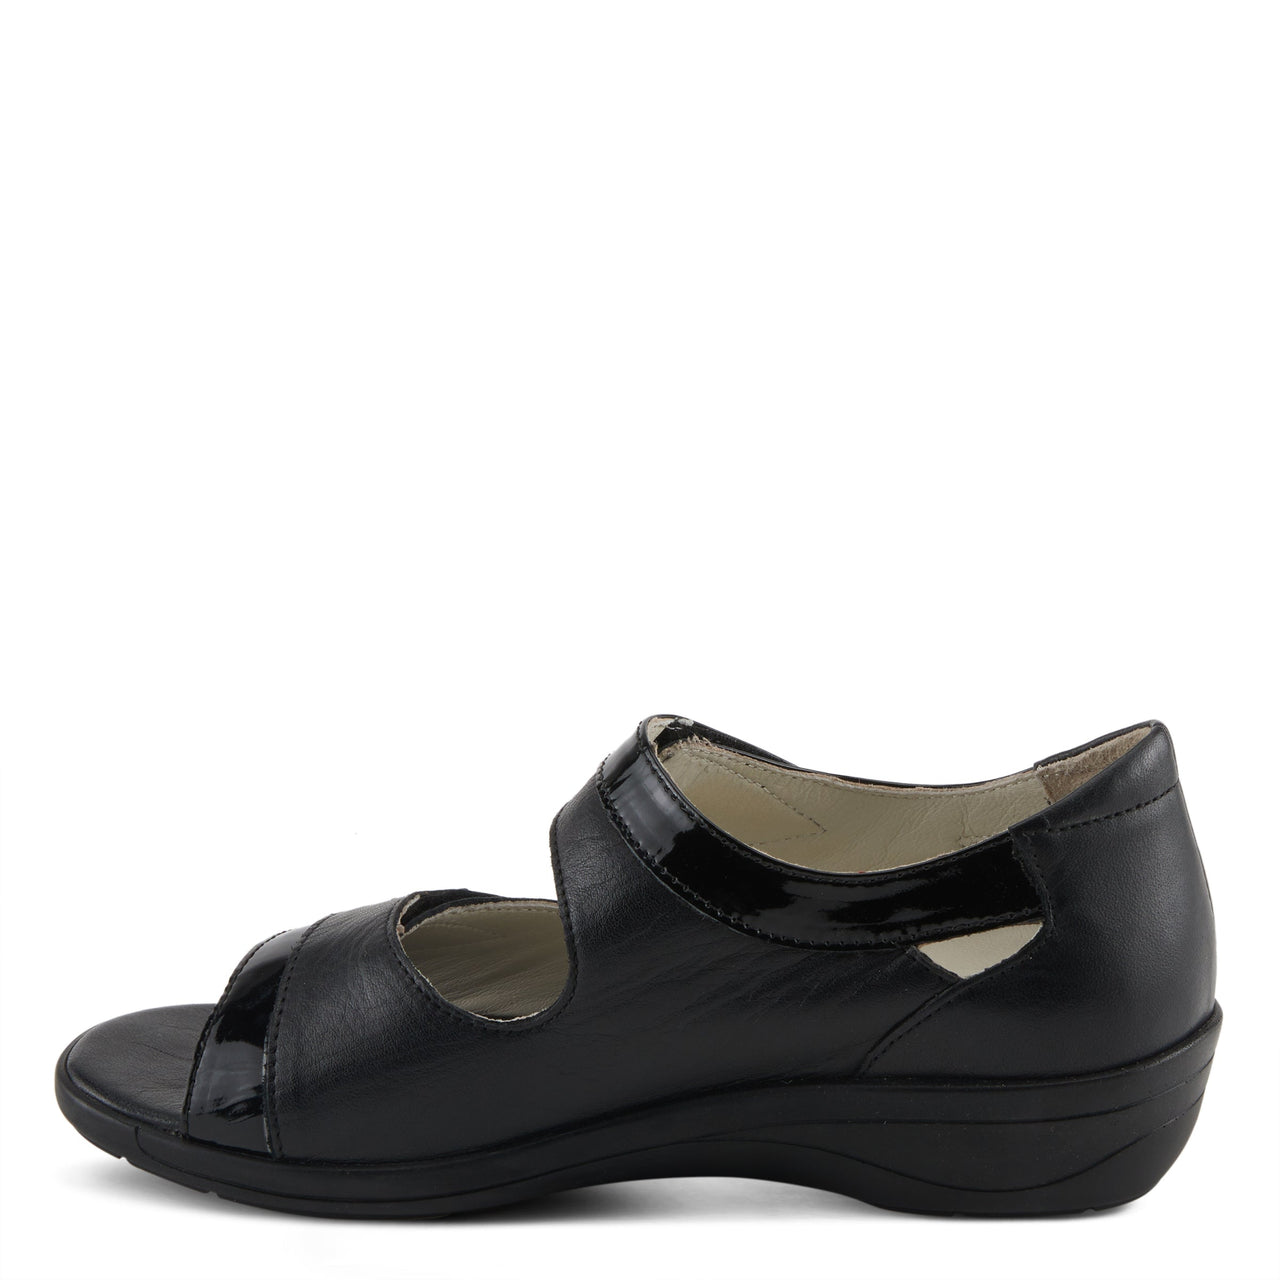 Comfortable and durable Flexus sandals in timeless black color